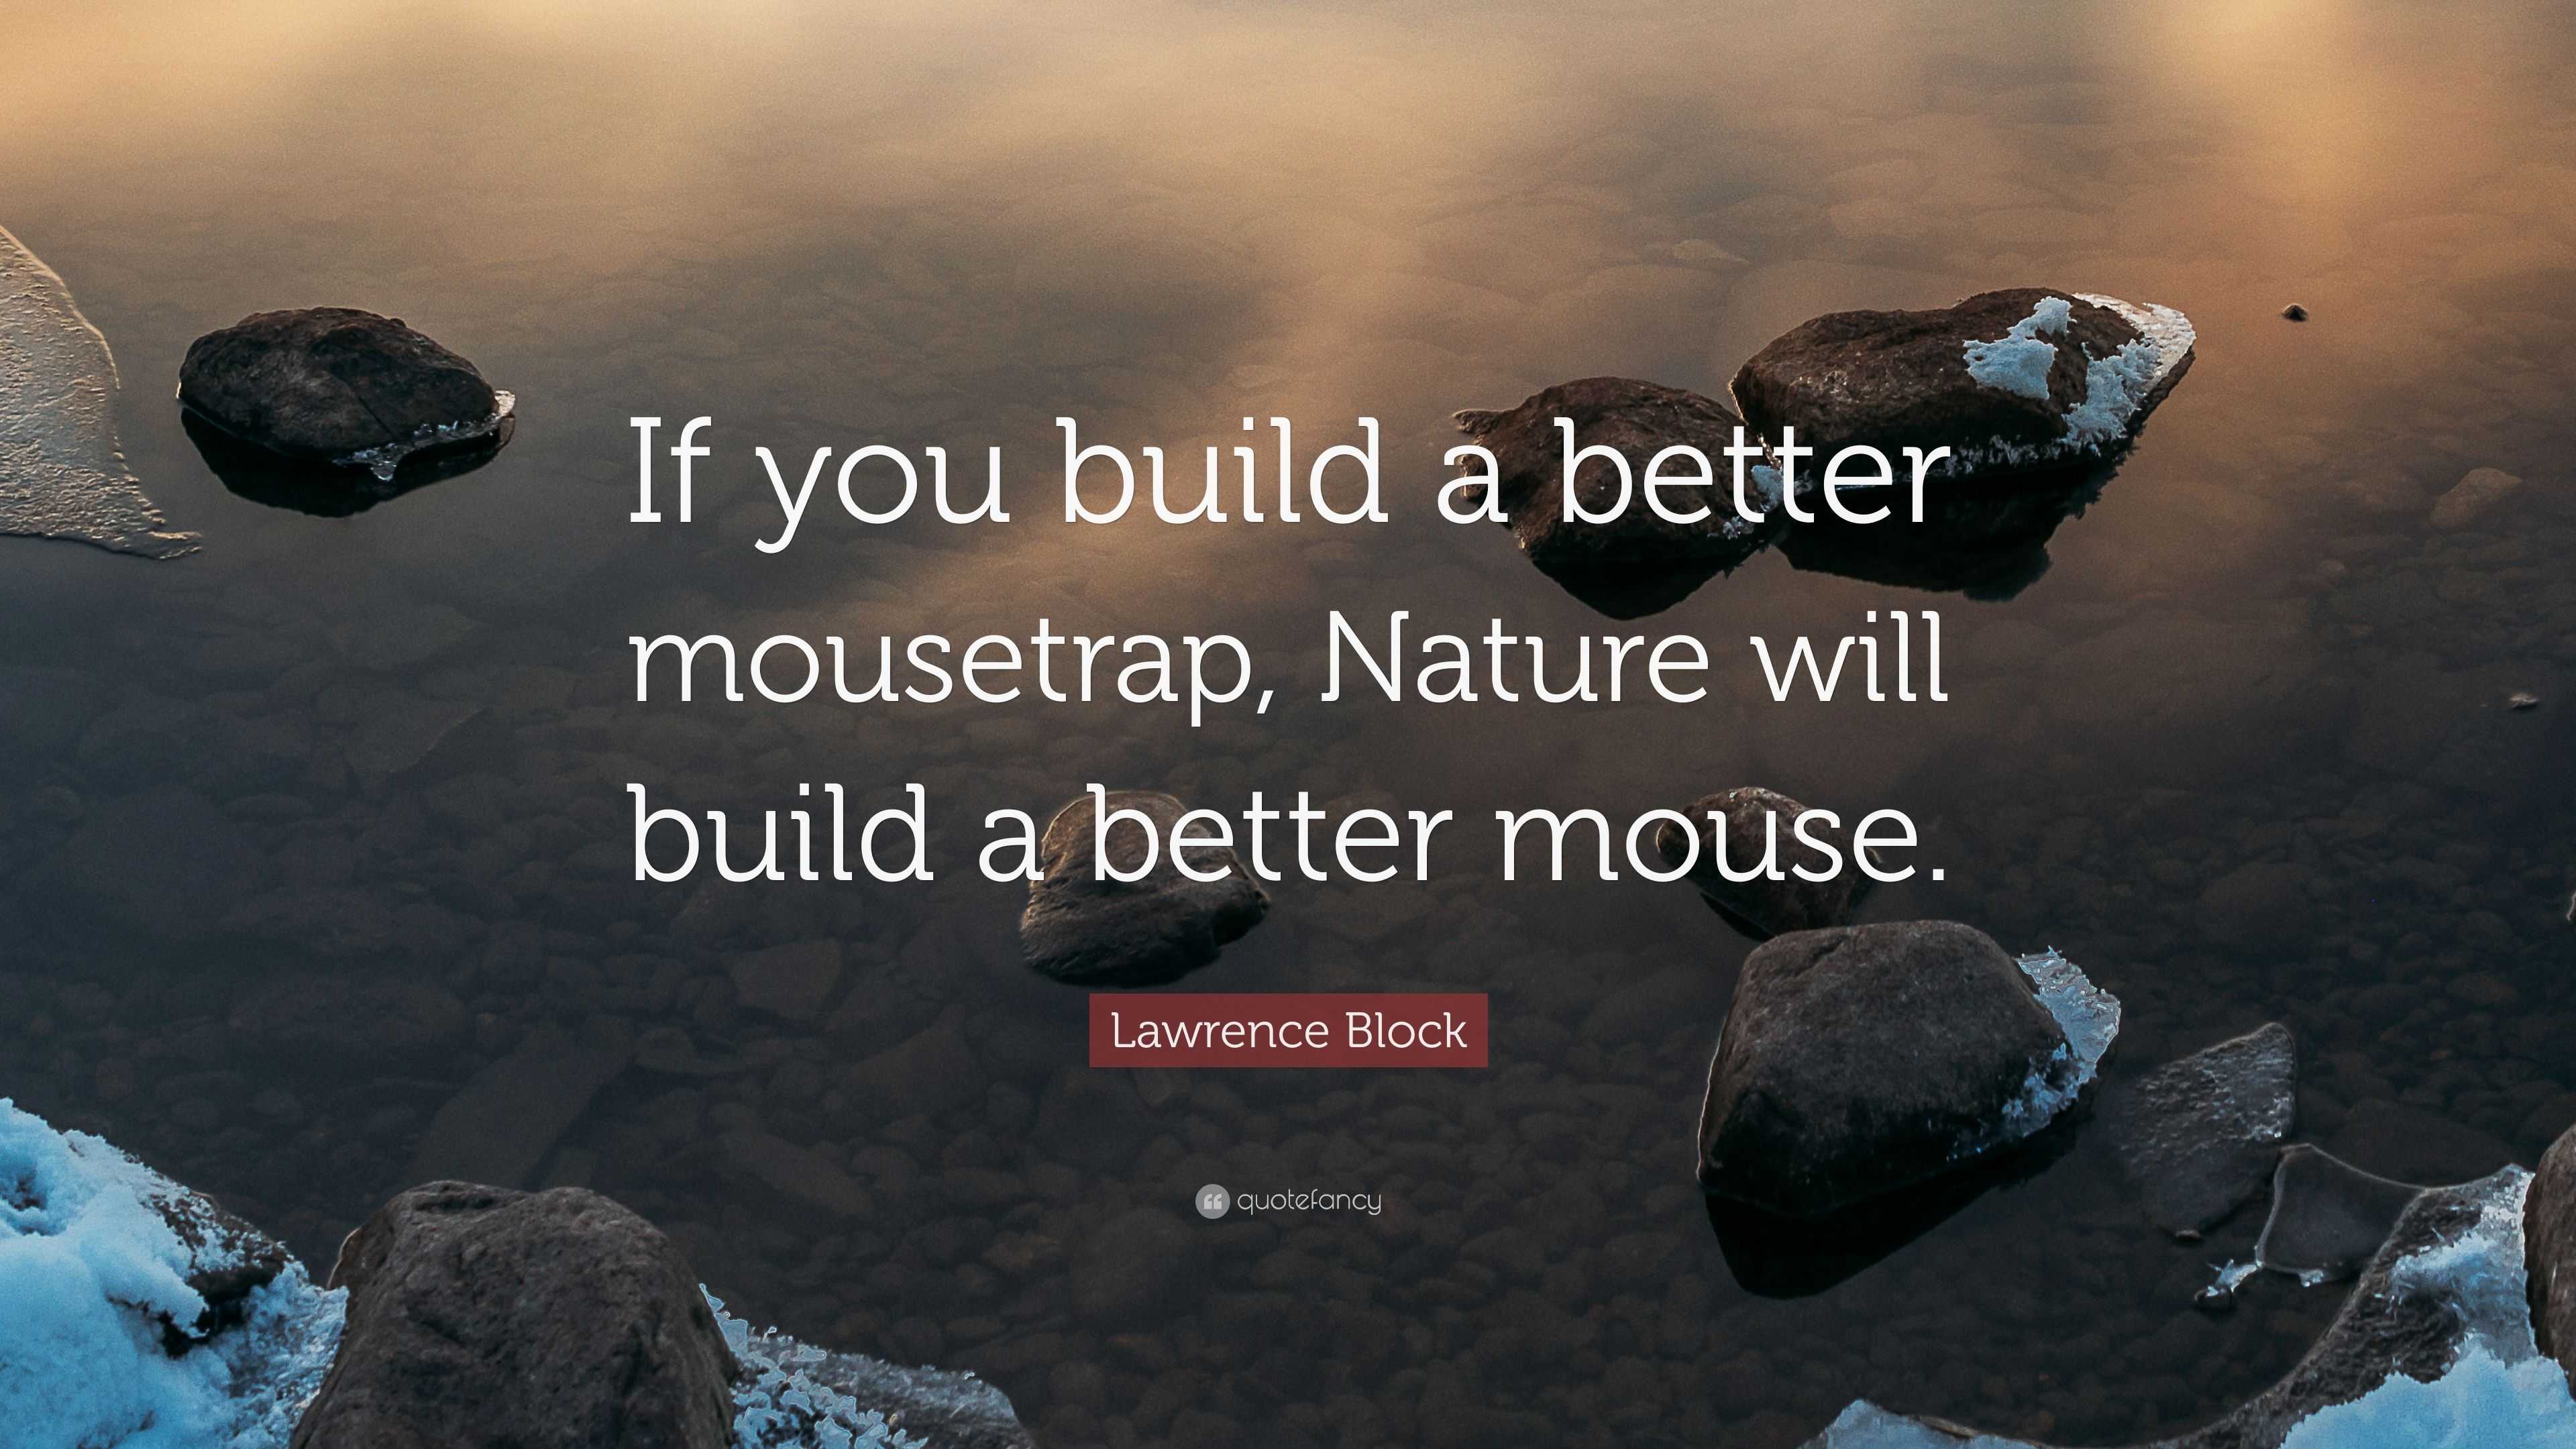 https://quotefancy.com/media/wallpaper/3840x2160/5287718-Lawrence-Block-Quote-If-you-build-a-better-mousetrap-Nature-will.jpg